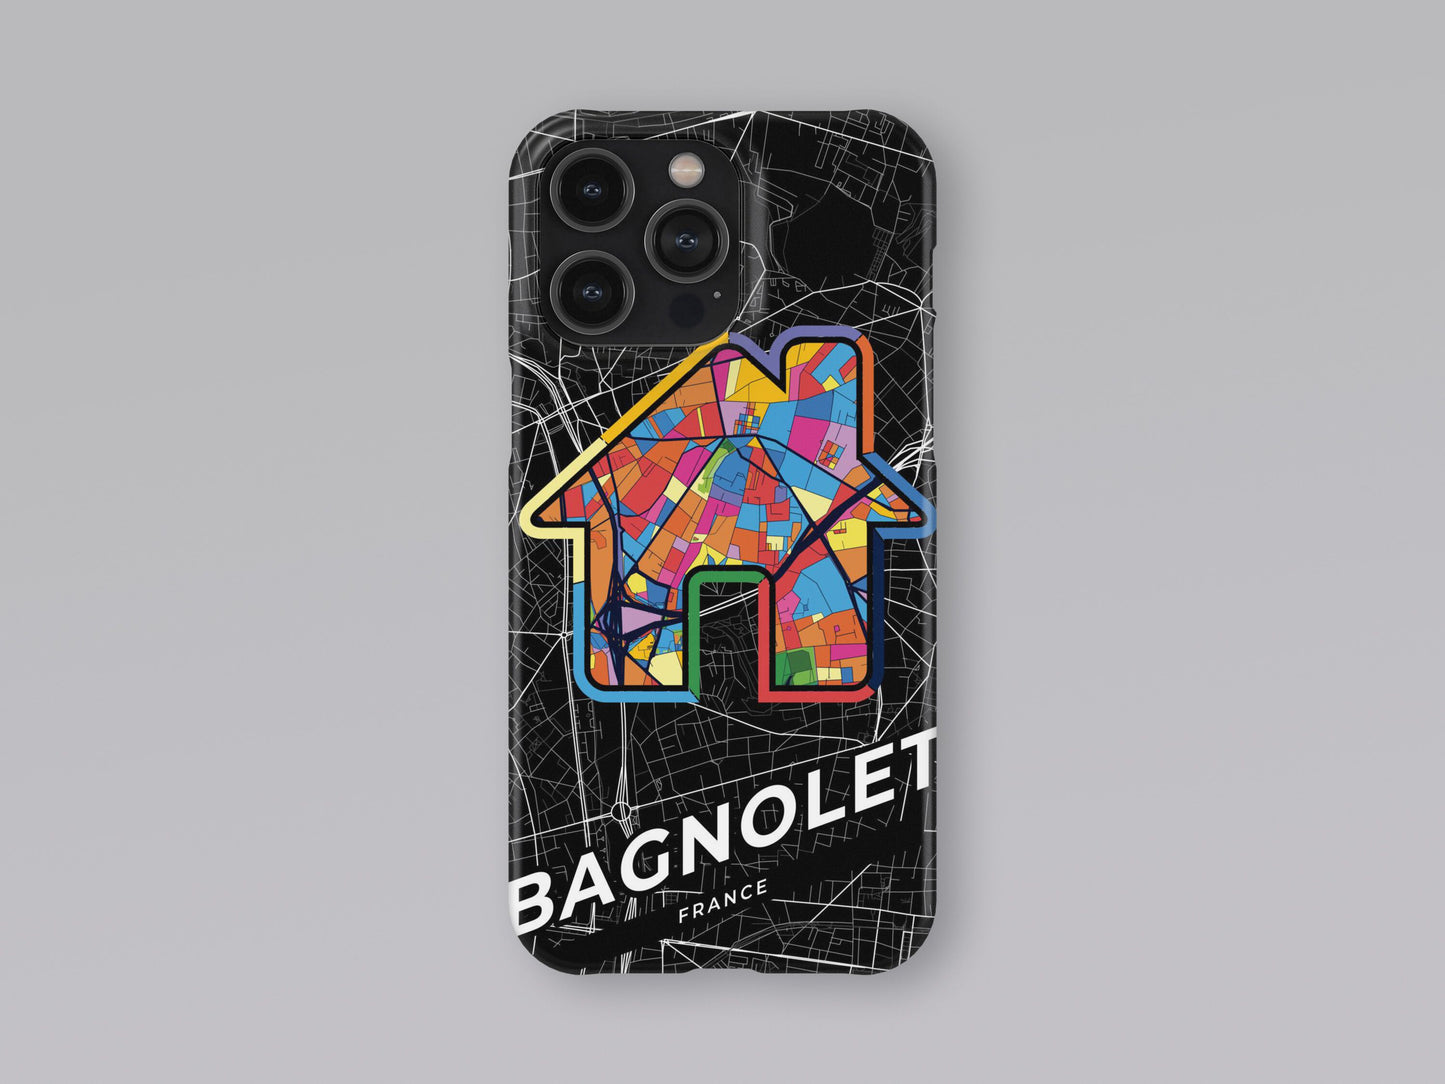 Bagnolet France slim phone case with colorful icon. Birthday, wedding or housewarming gift. Couple match cases. 3